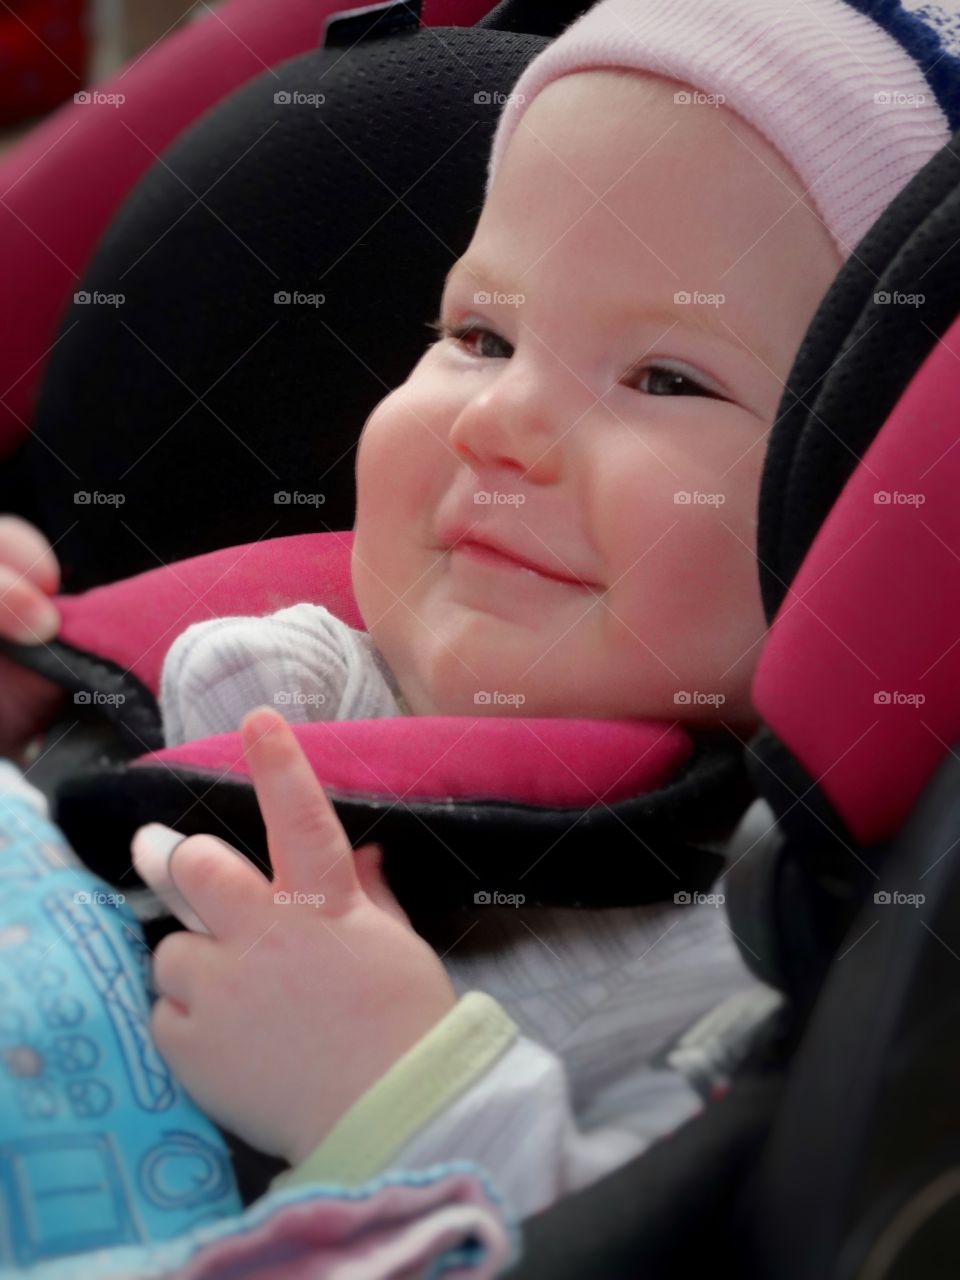 Baby In A Car Seat
